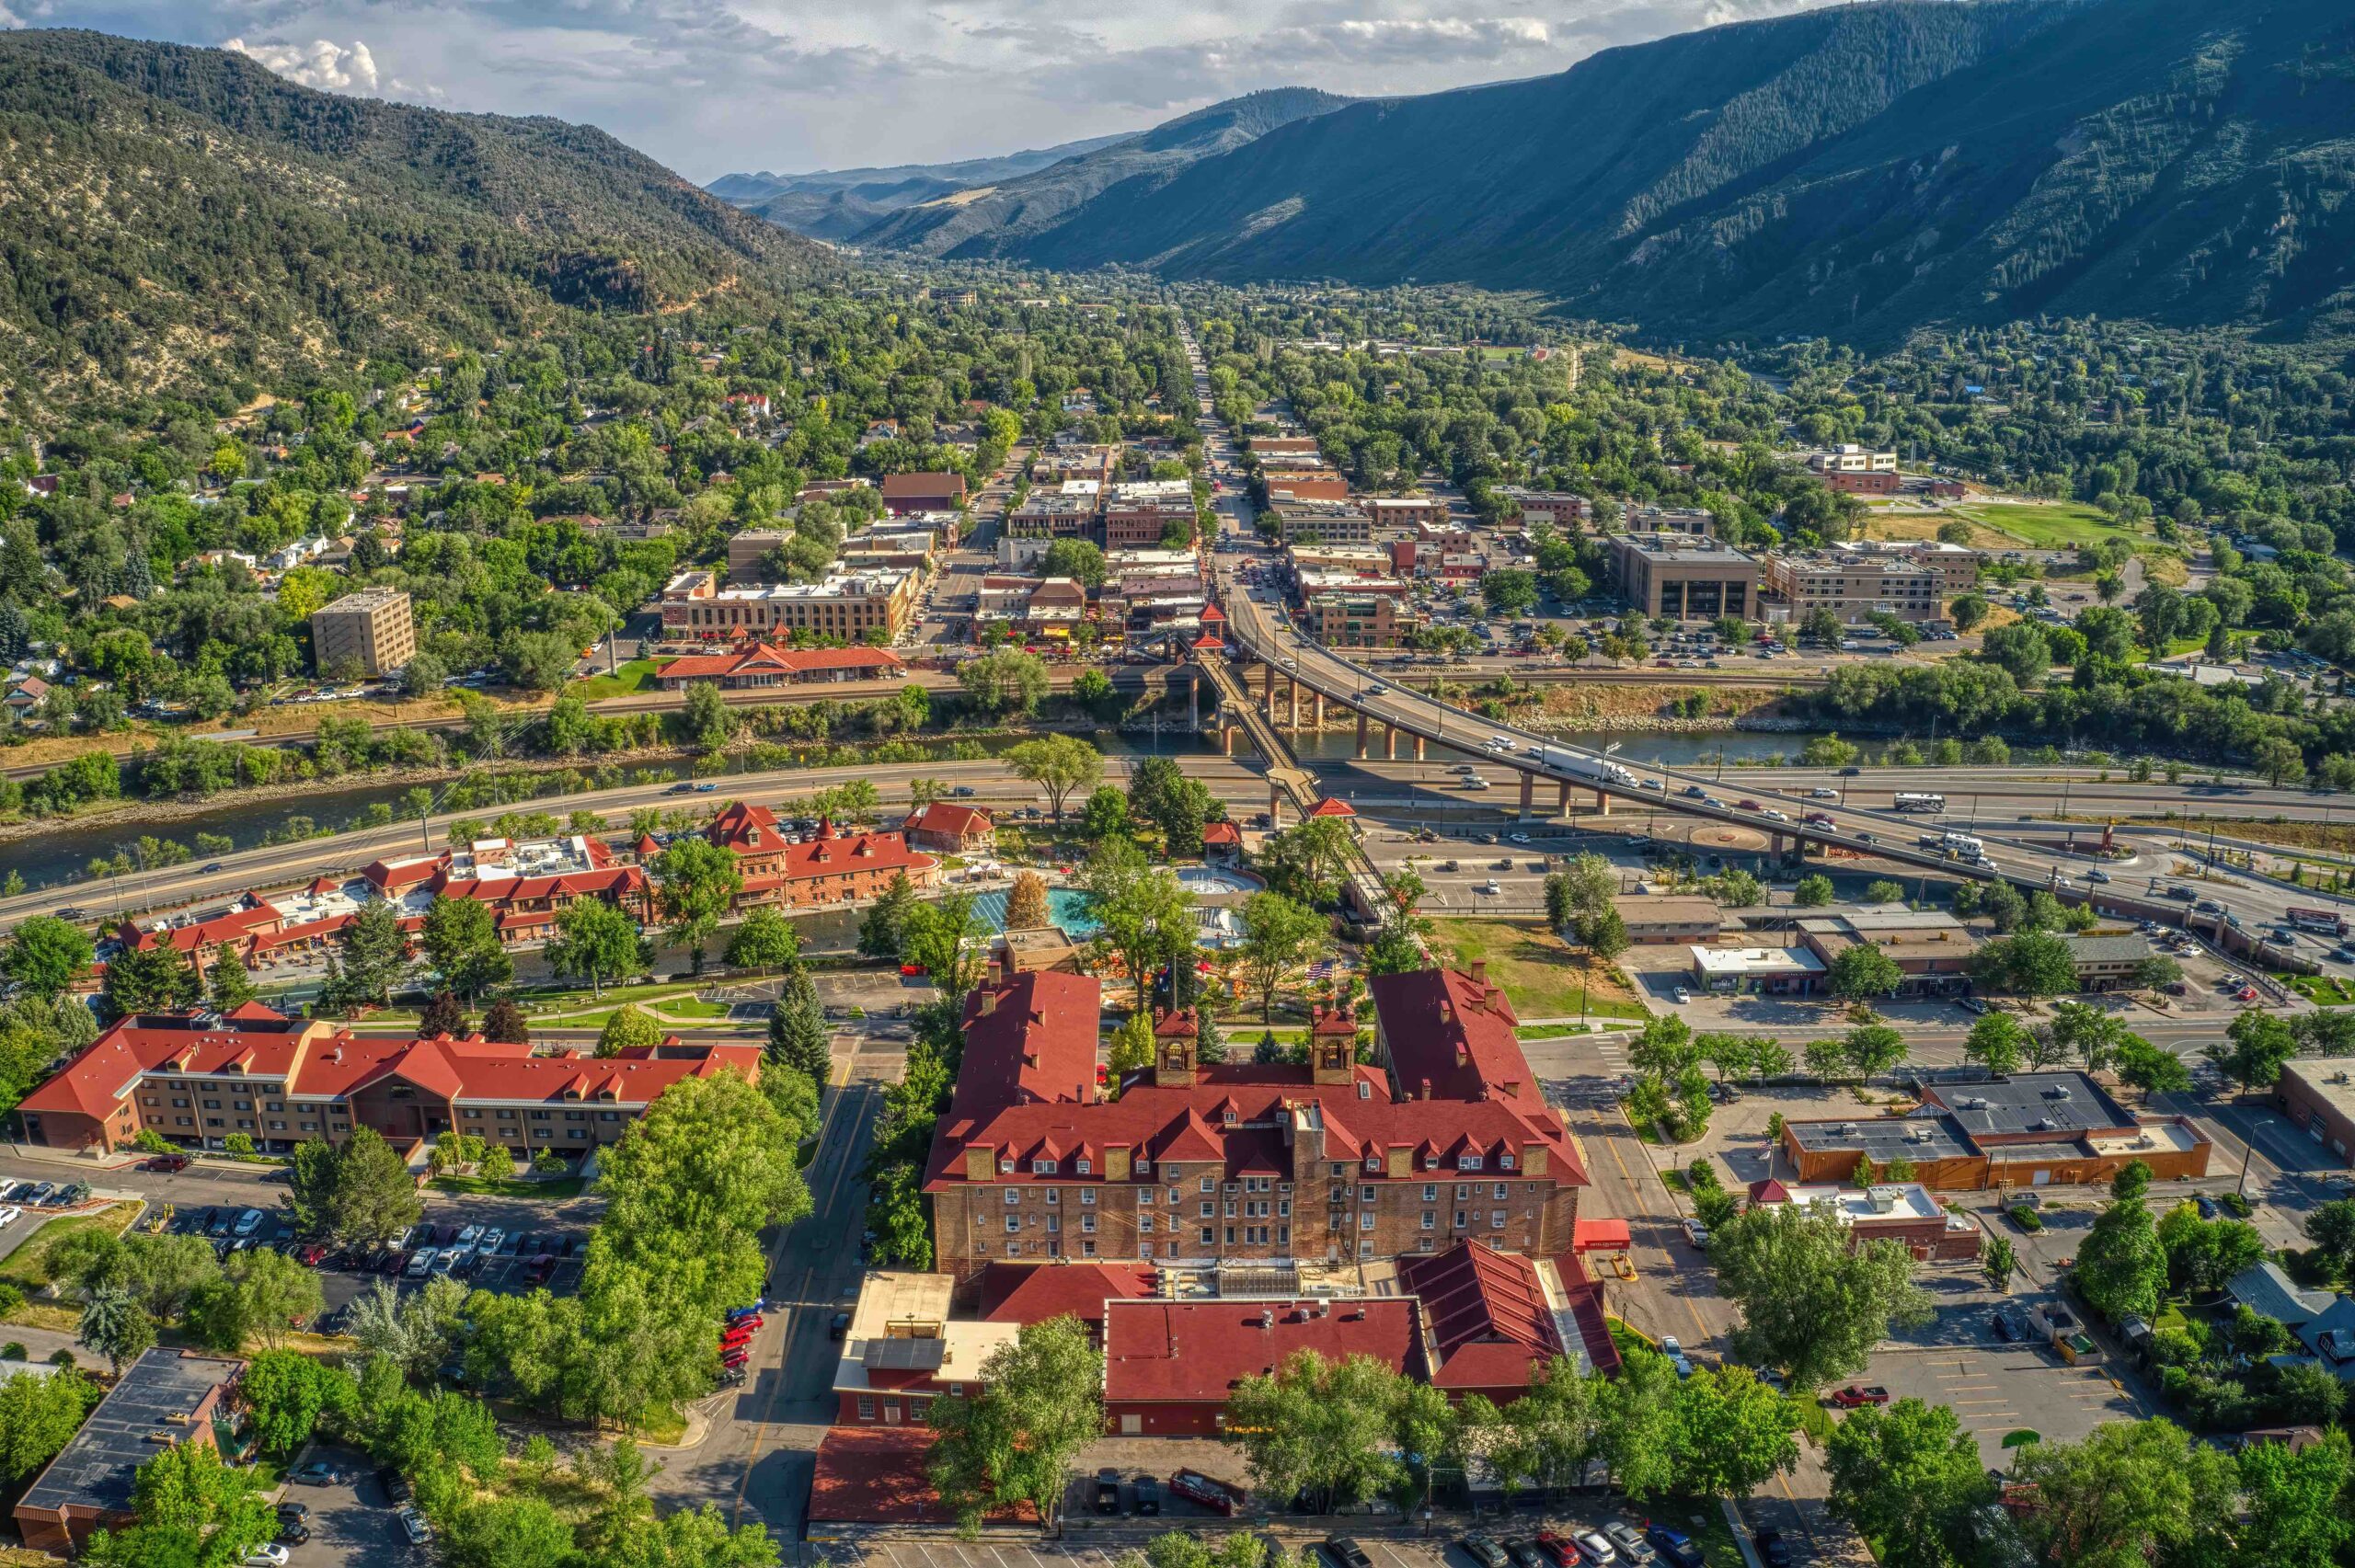 An elevated perspective of downtown Glenwood Springs. You can see many businesses, cars, and the large Glenwood Hot Springs Pool.